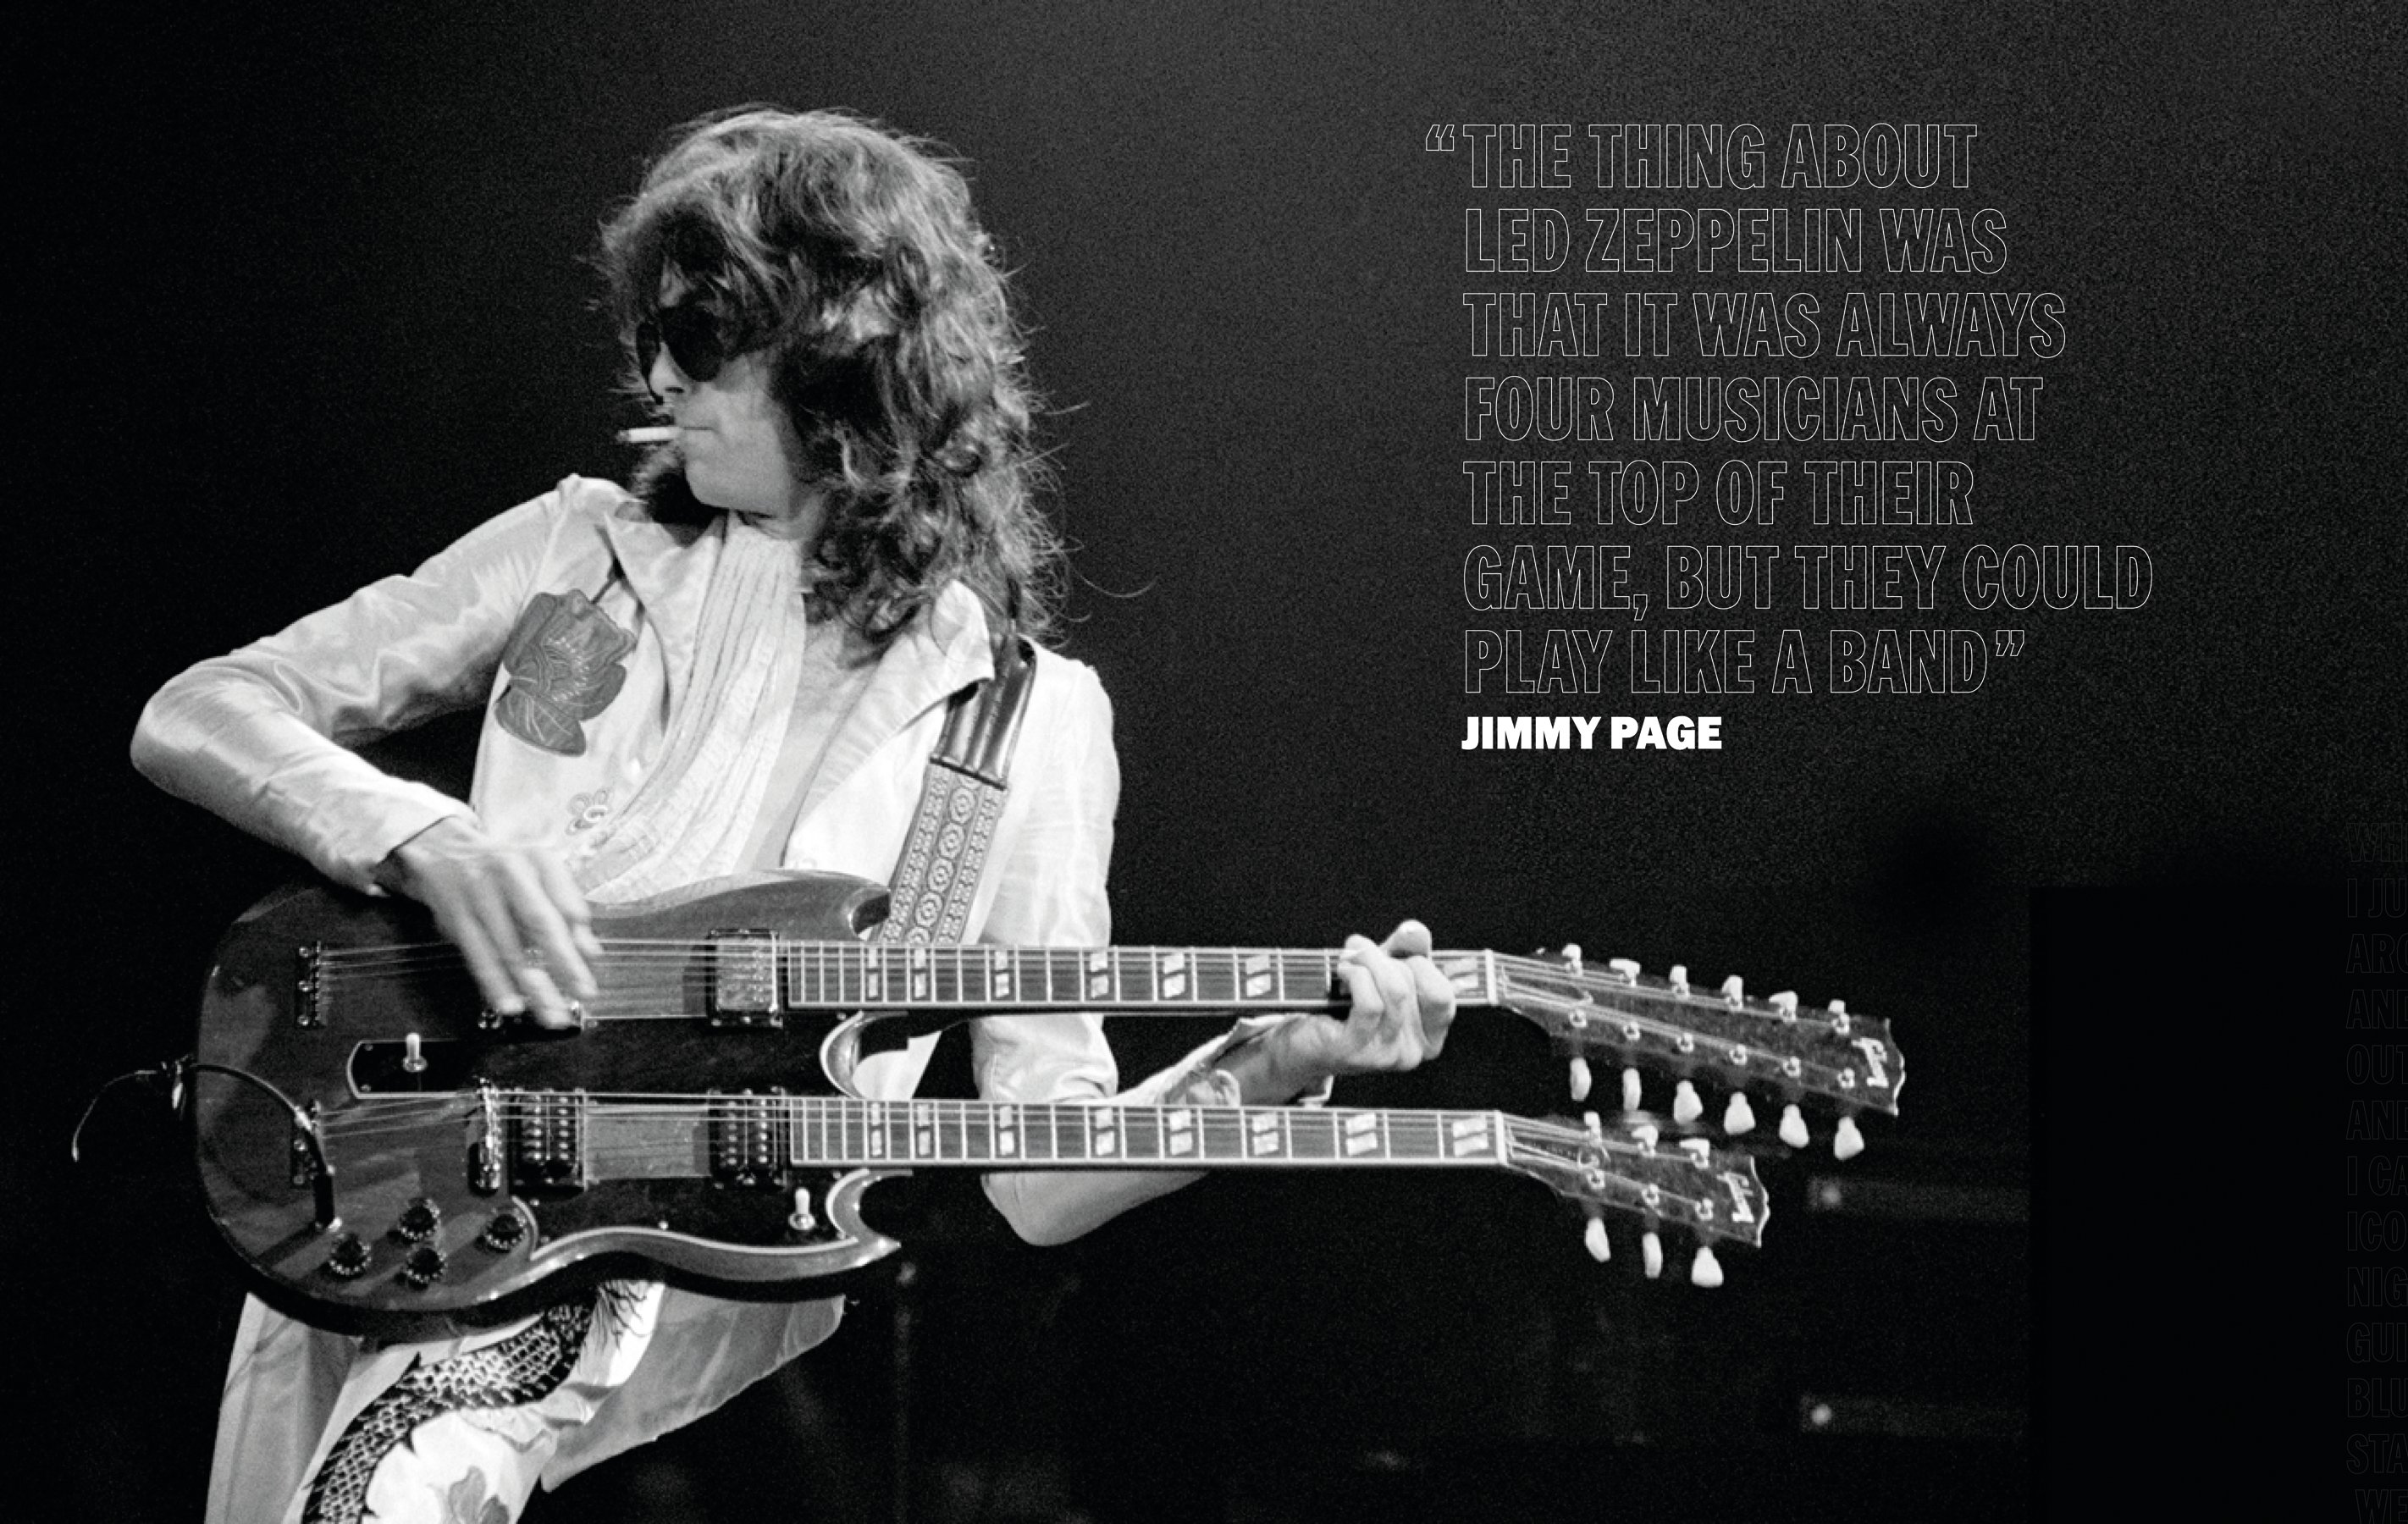 Dramatic live black and white shot of Jimmy Page playing electric guitar on stage illuminated by spotlight with Led Zeppelin Live 1975-1977 in gold and white font below